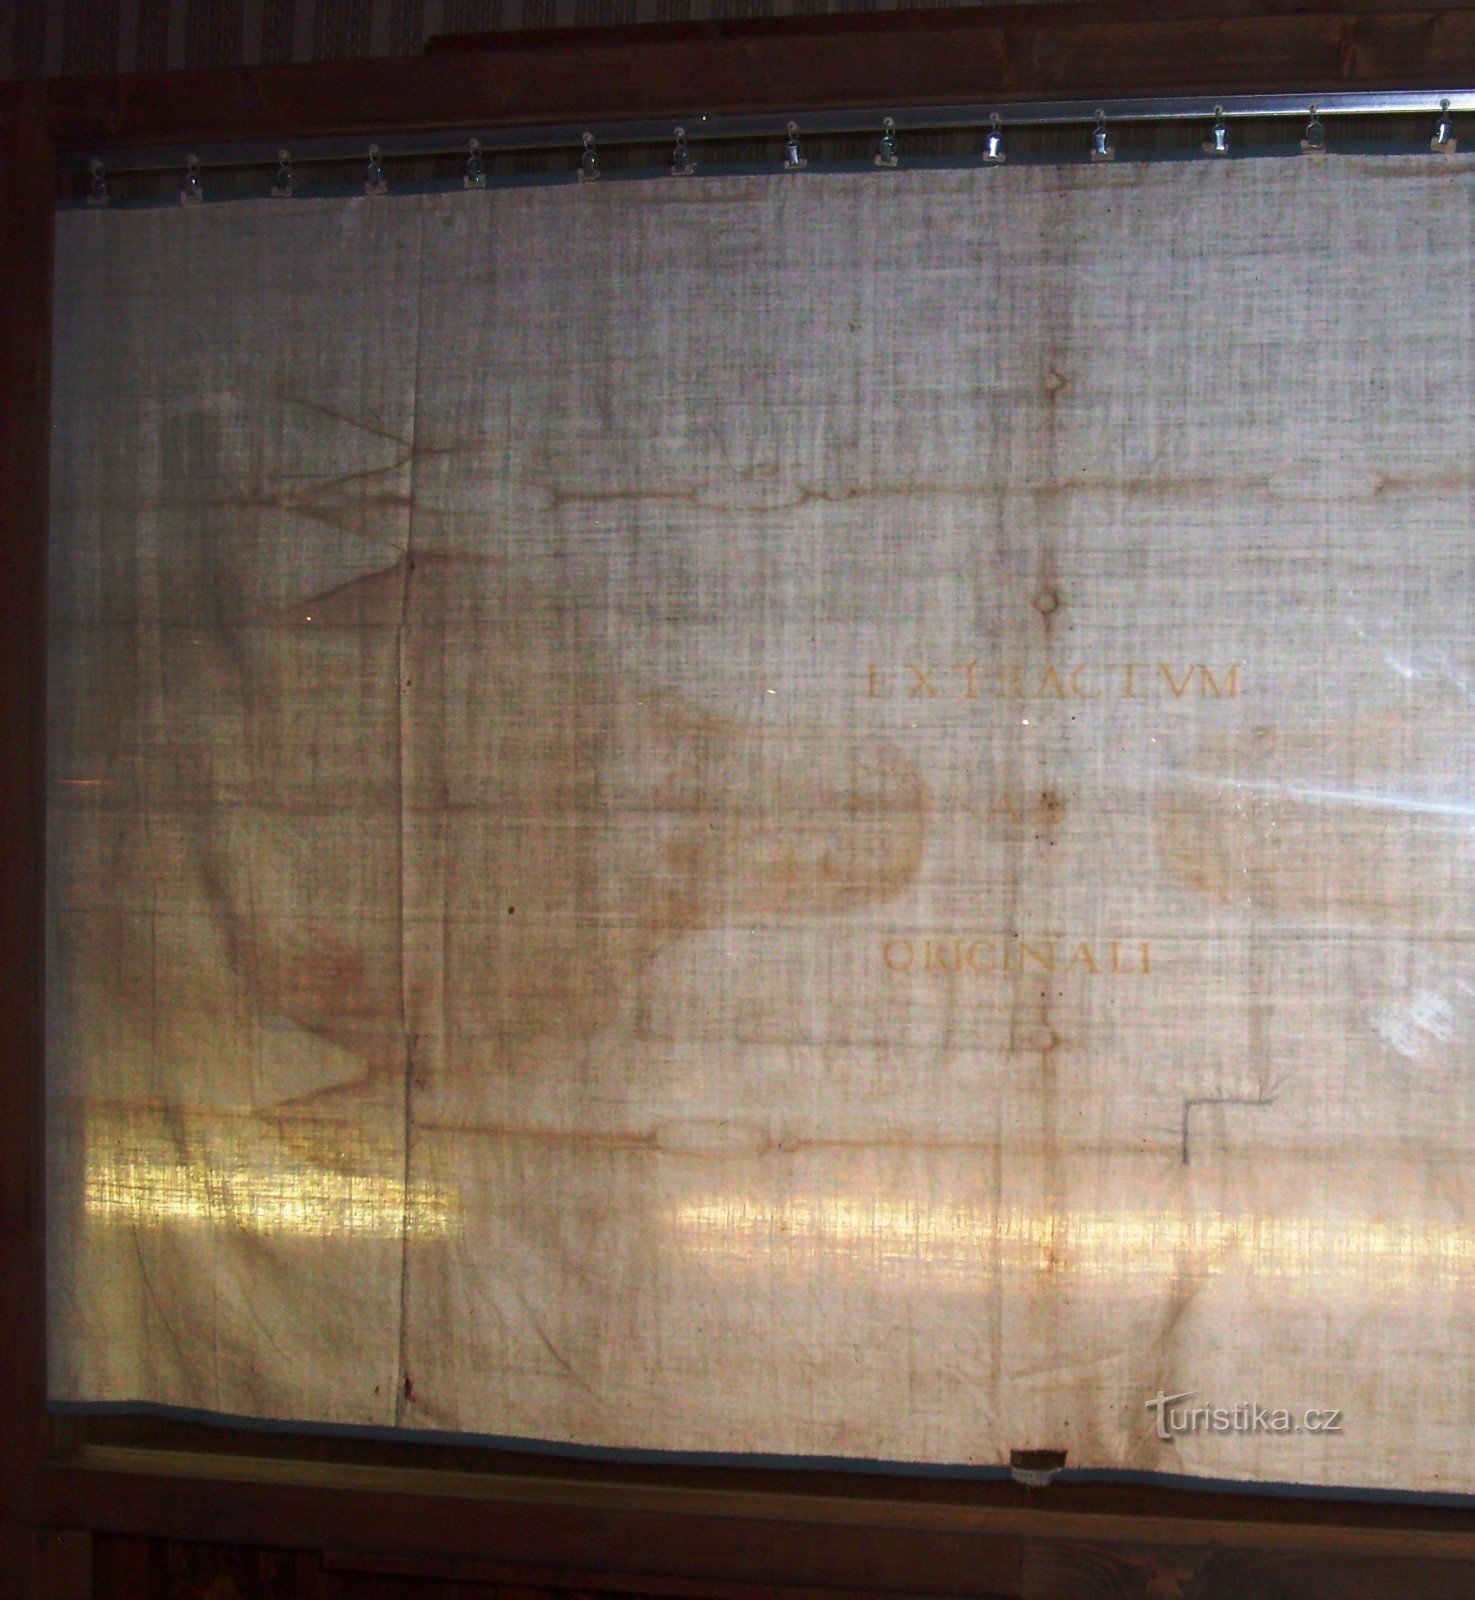 a copy of the so-called Shroud of Turin